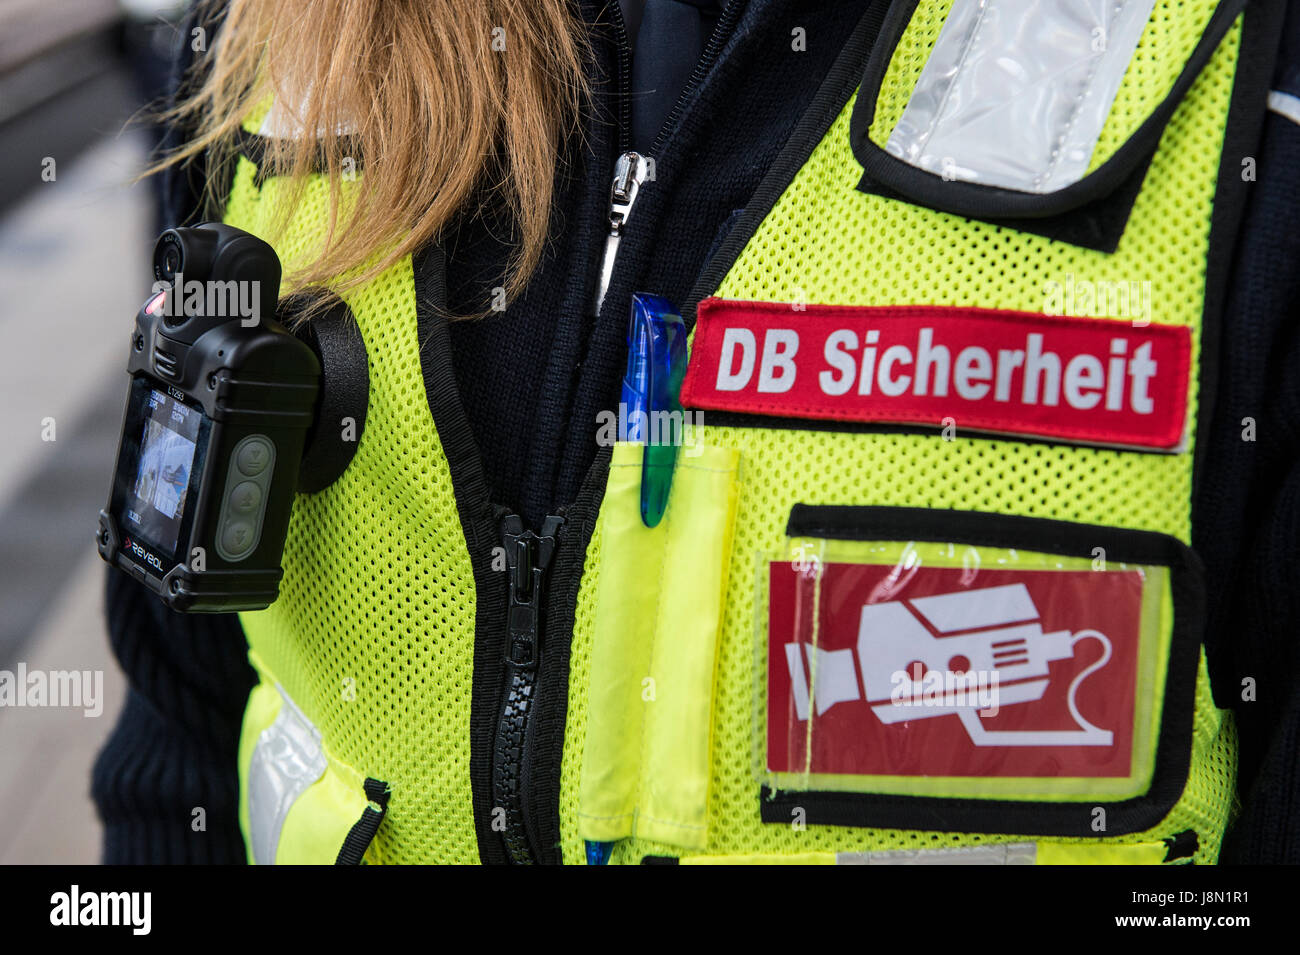 Berlin, Germany. 14th July, 2016. 'DB-Sicherheit' (lit. DB Security) and a video symbol on the vest of a member of Deutsche Bahn security staff at Alexanderplatz station in Berlin, Germany, 14 July 2016. Photo: Paul Zinken/dpa/Alamy Live News Stock Photo